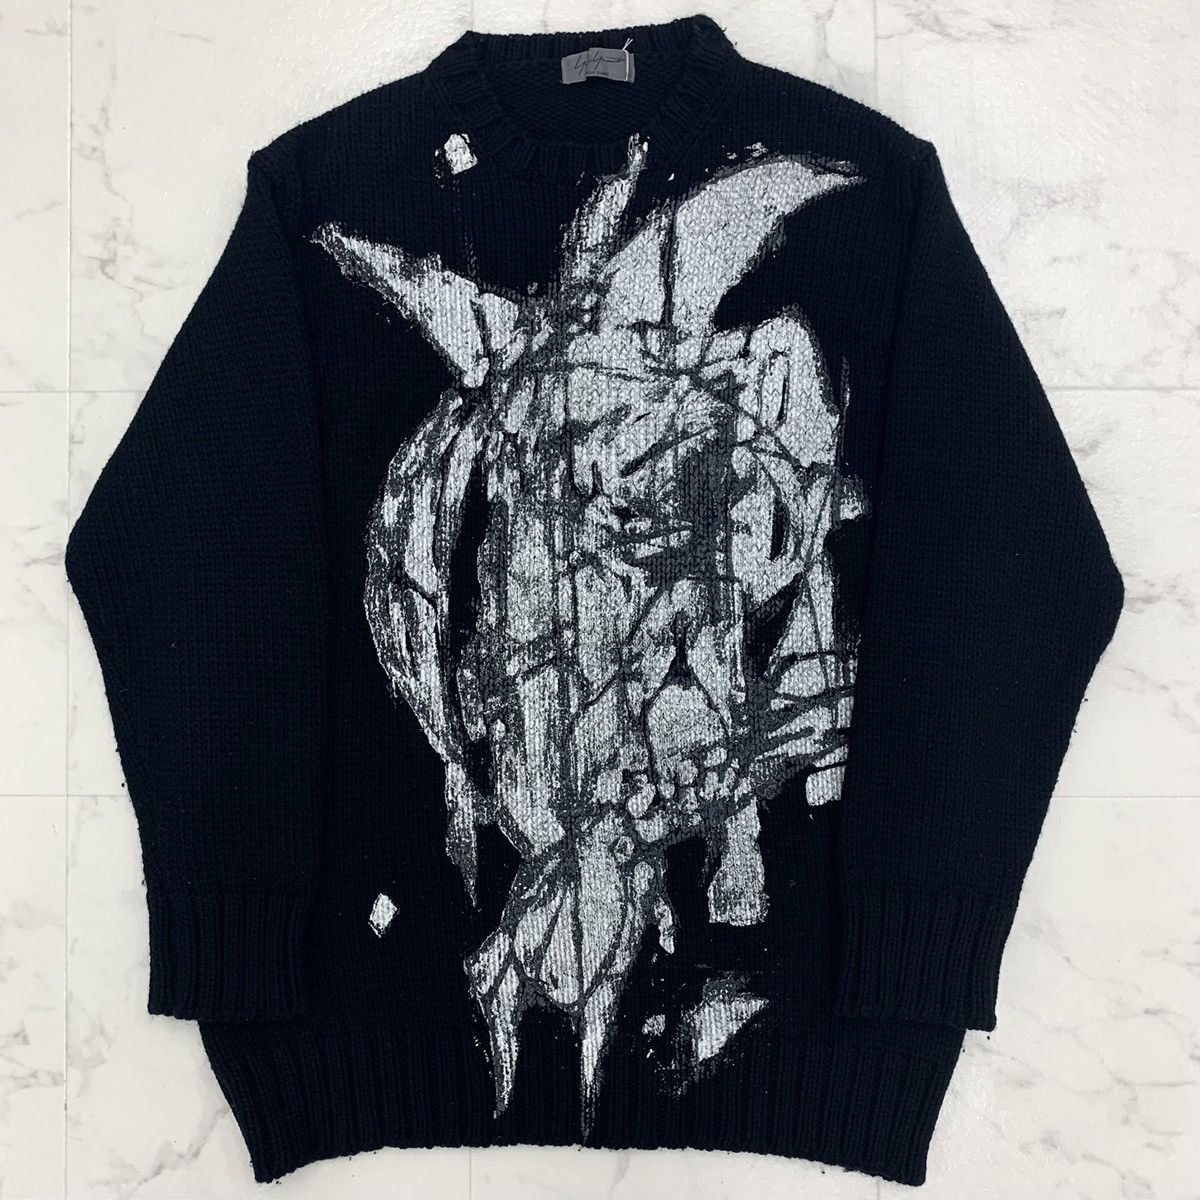 Yohji Yamamoto Pour Homme AW04 2004 Runway Painted Knitwear | Grailed